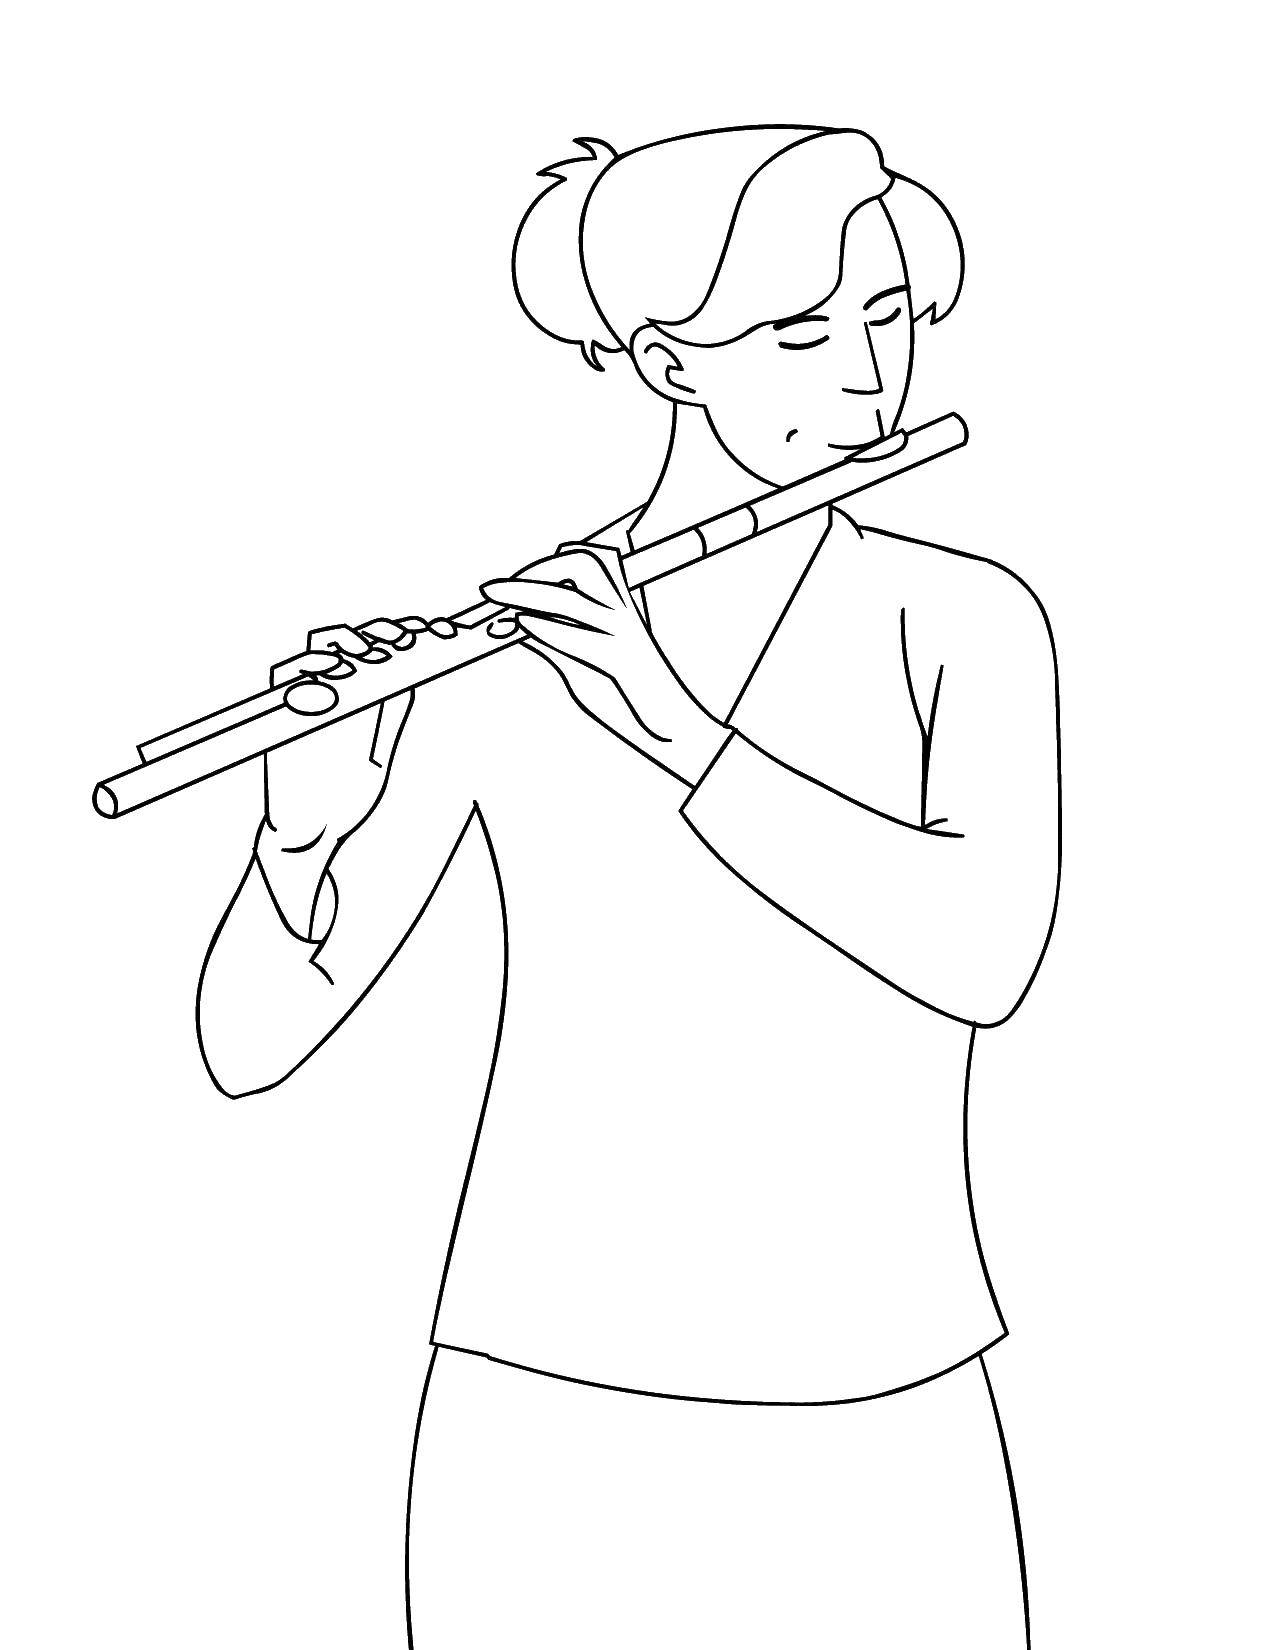 Coloring Girl playing the flute. Category Music. Tags:  Music, instrument, musician, note.